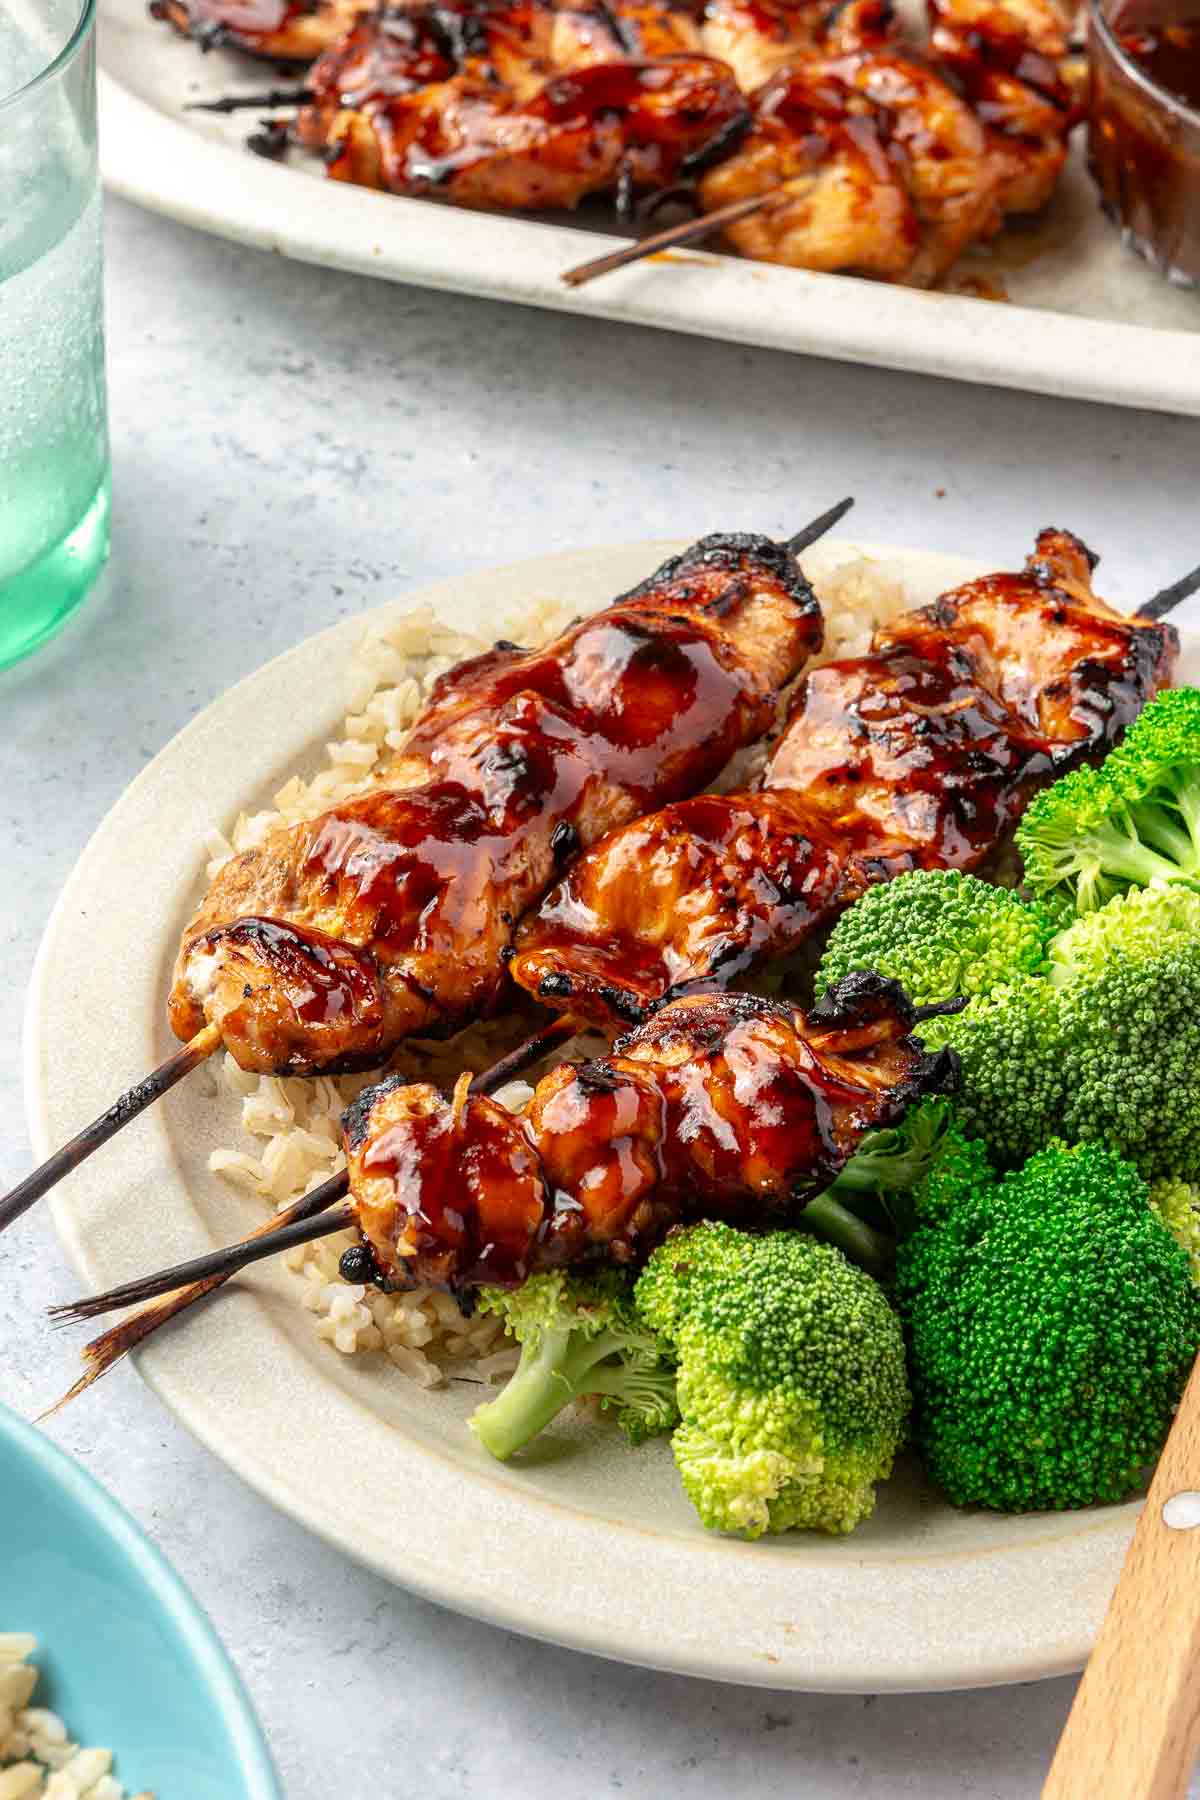 Glazed chicken skewers on a plate with rice and broccoli.